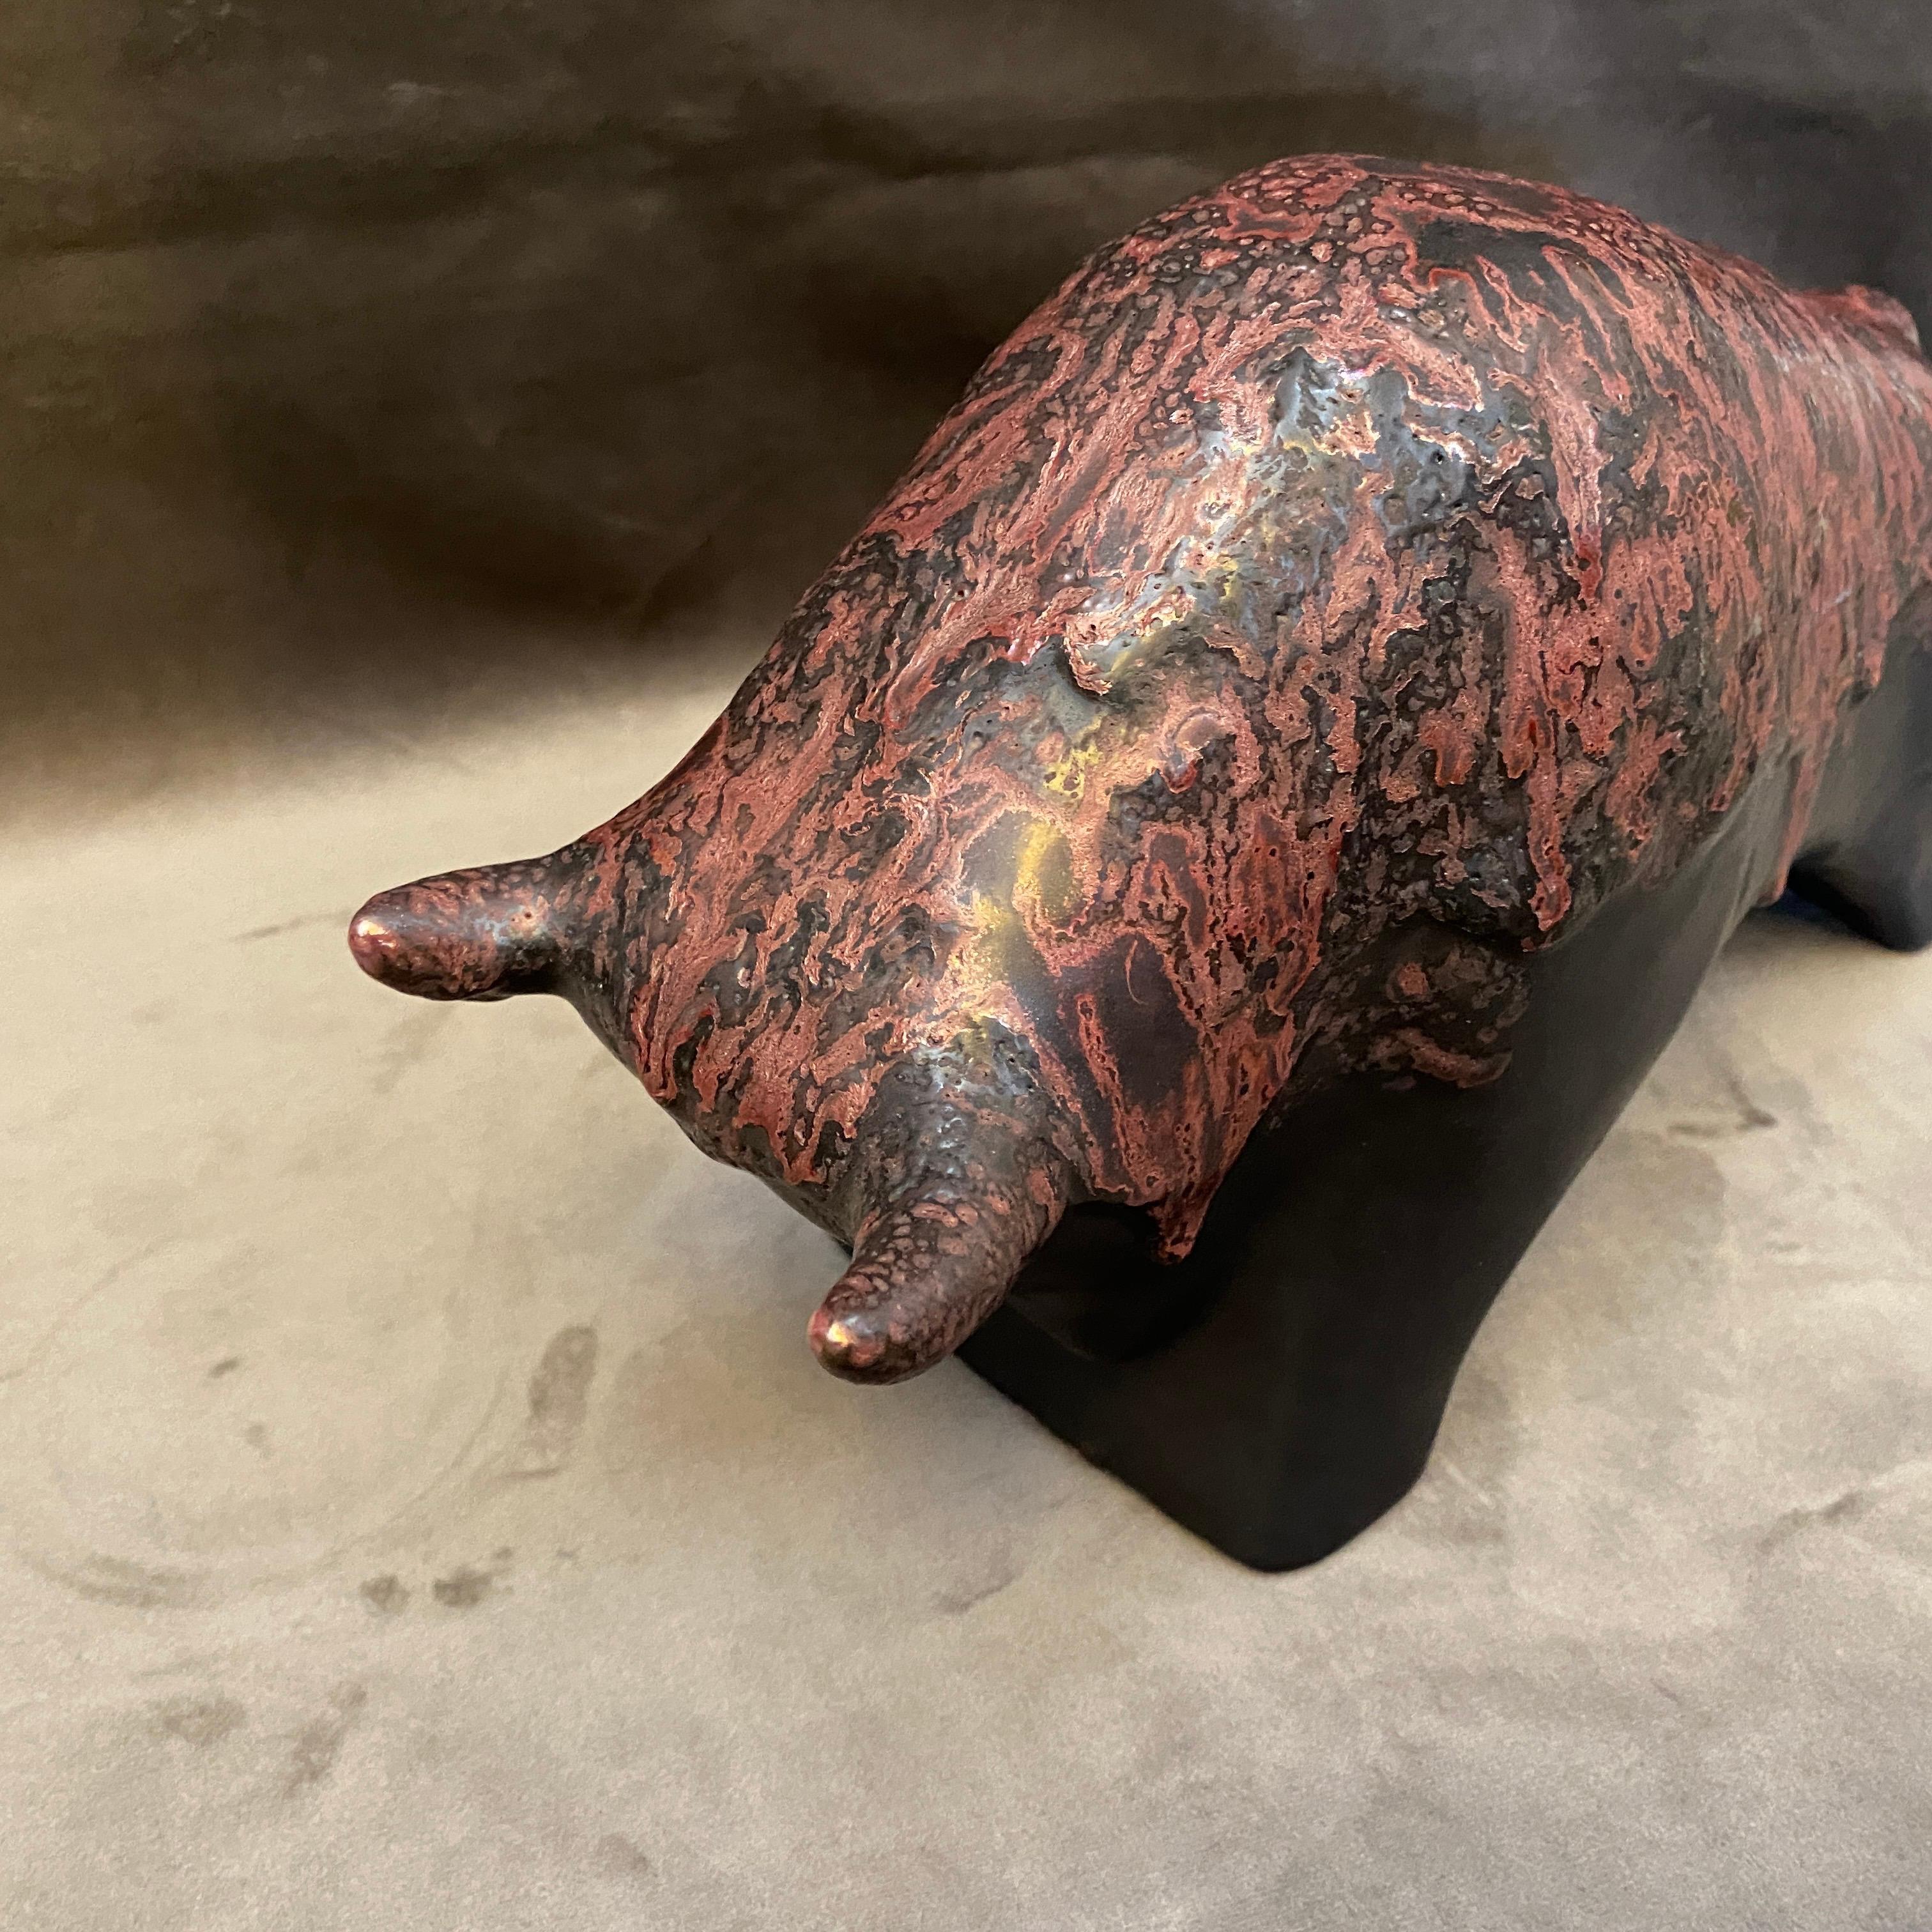 A ceramic bull made in. Germany in the seventies. This kind of ceramic, very popular in that period has been called Fat Lava Keramik. Item it's in perfect conditions.